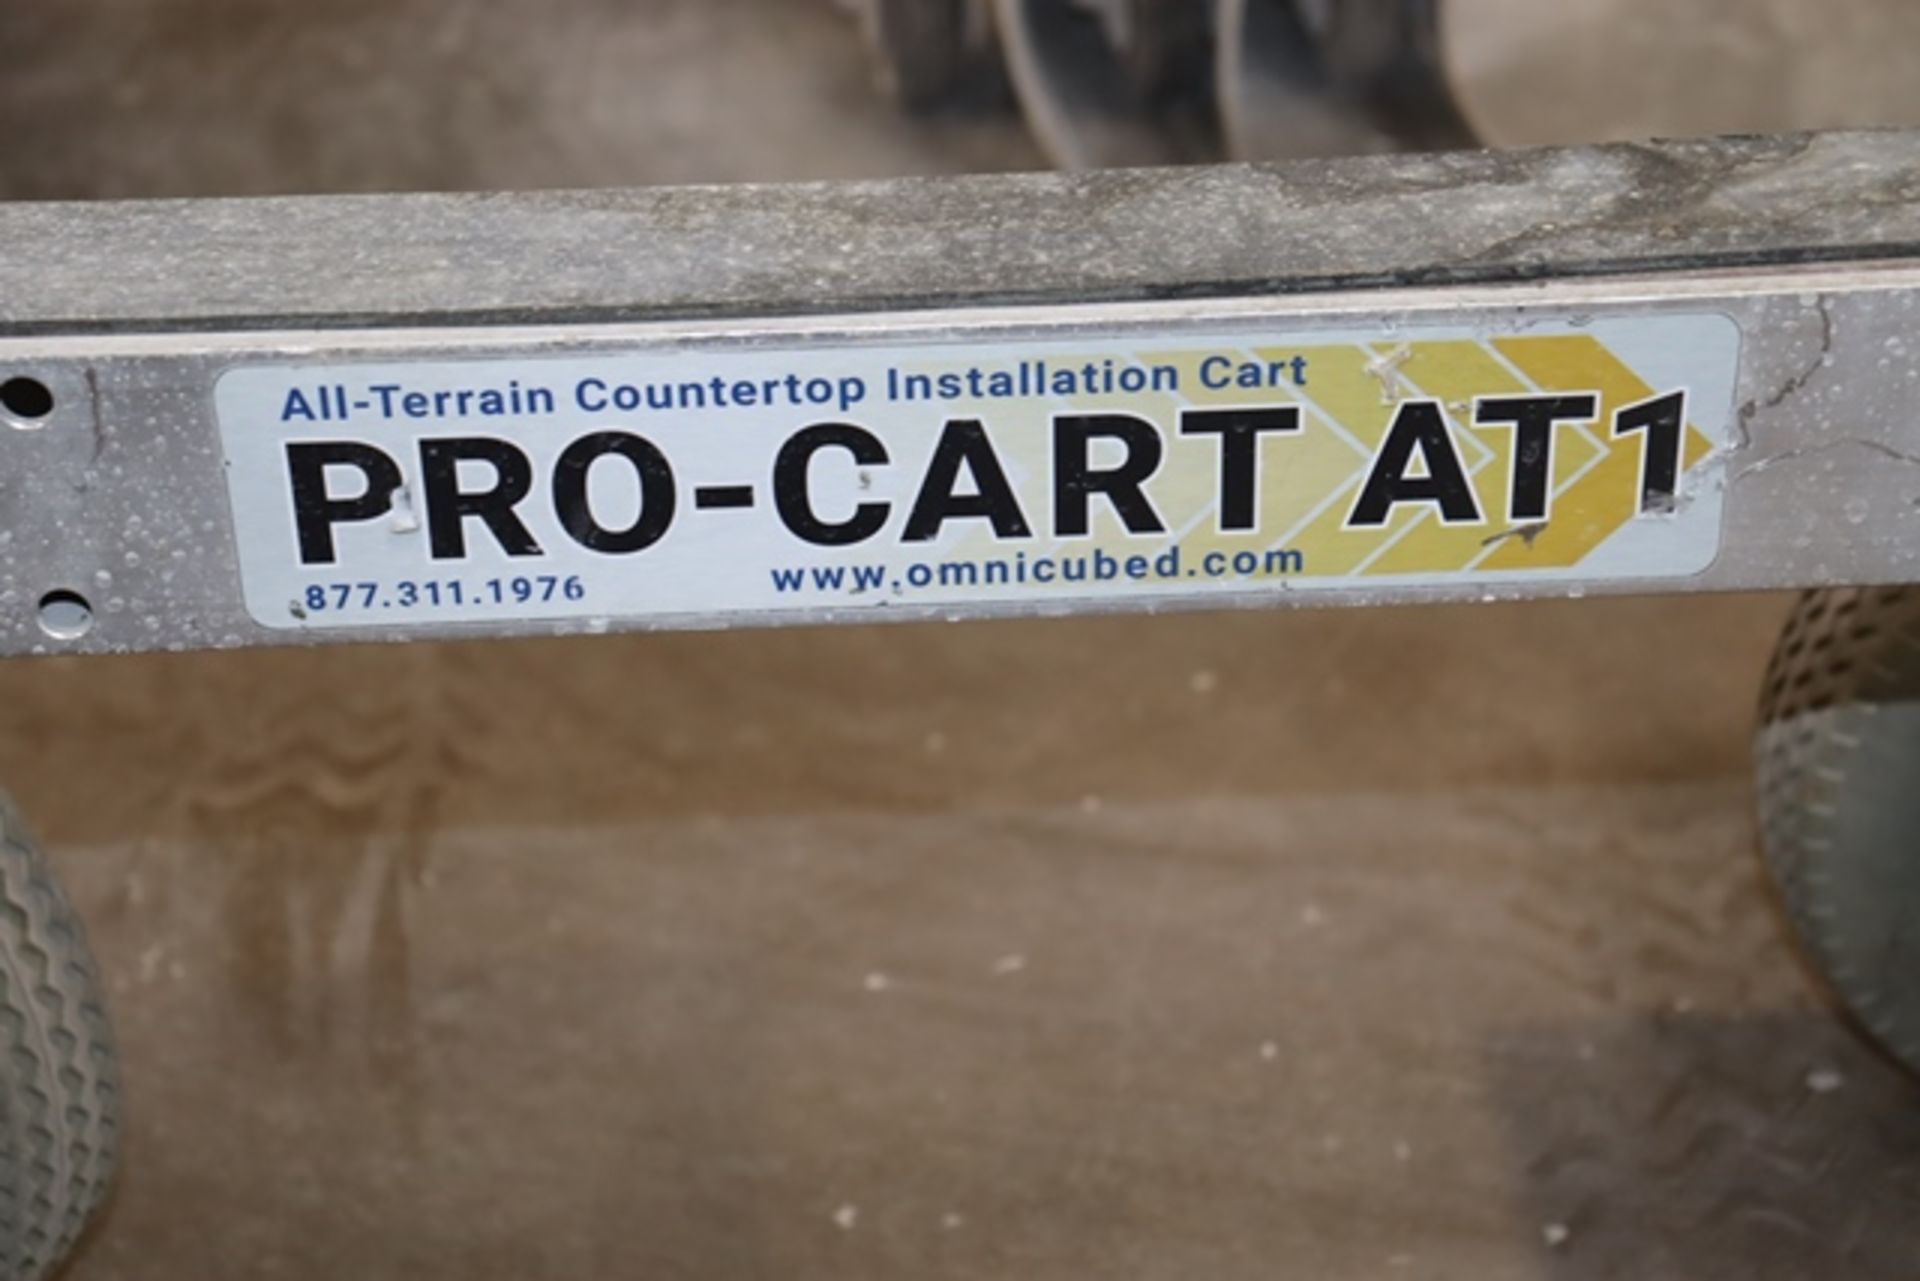 OMNI CUBED Pro Cart AT1 All Terrain Countertop Install Cart - Image 3 of 3